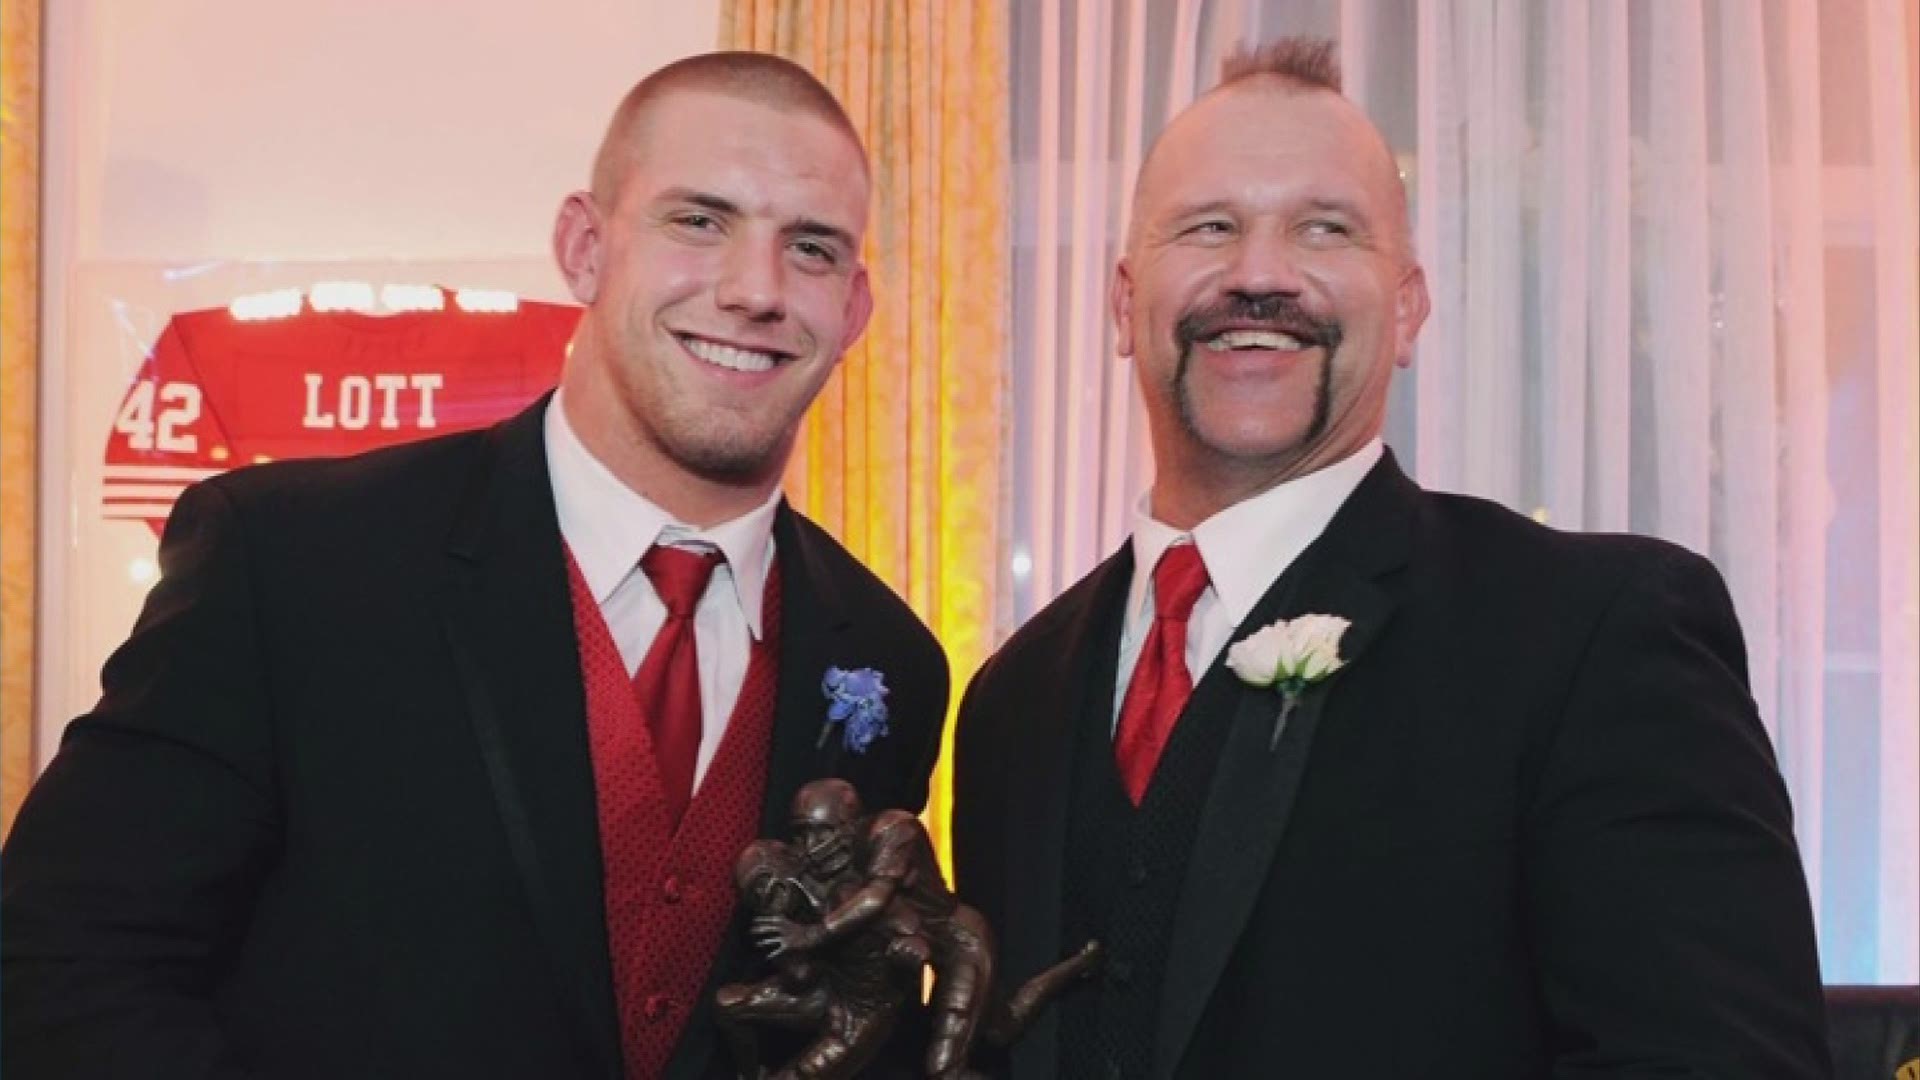 Joe Laurinaitis, WWE Hall of Fame wrestler "Road Warrior Animal" and father of Ohio State football great James Laurinaitis, dies at 60.